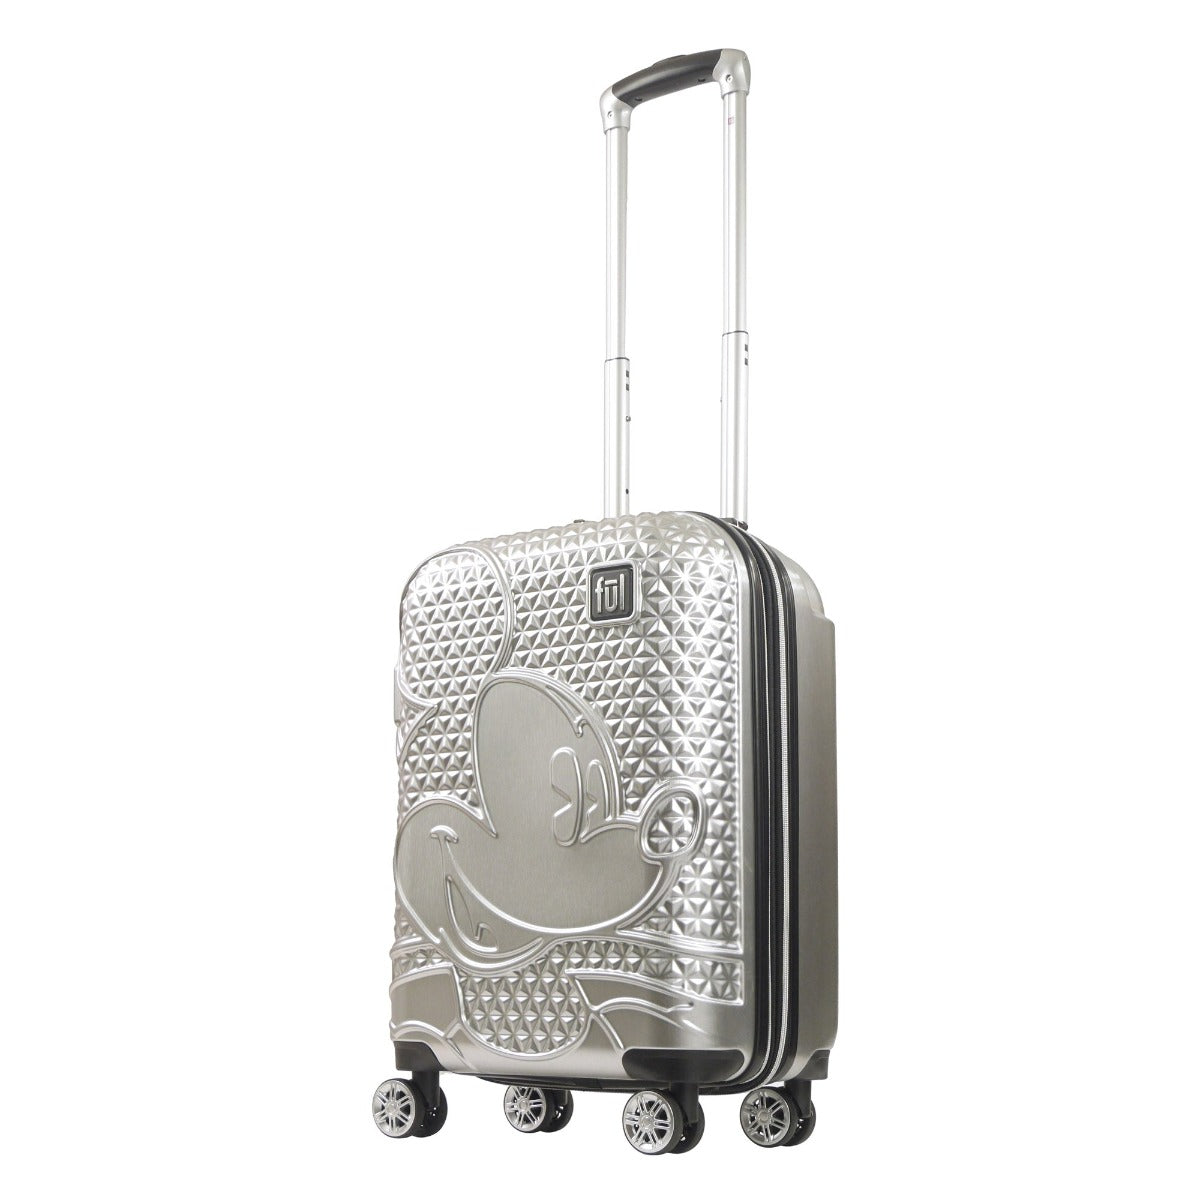 Adult Disney Luggage Mickey Mouse Texture Rolling Hard Sided Carry-on Spinner Suitcase Silver 22.5"